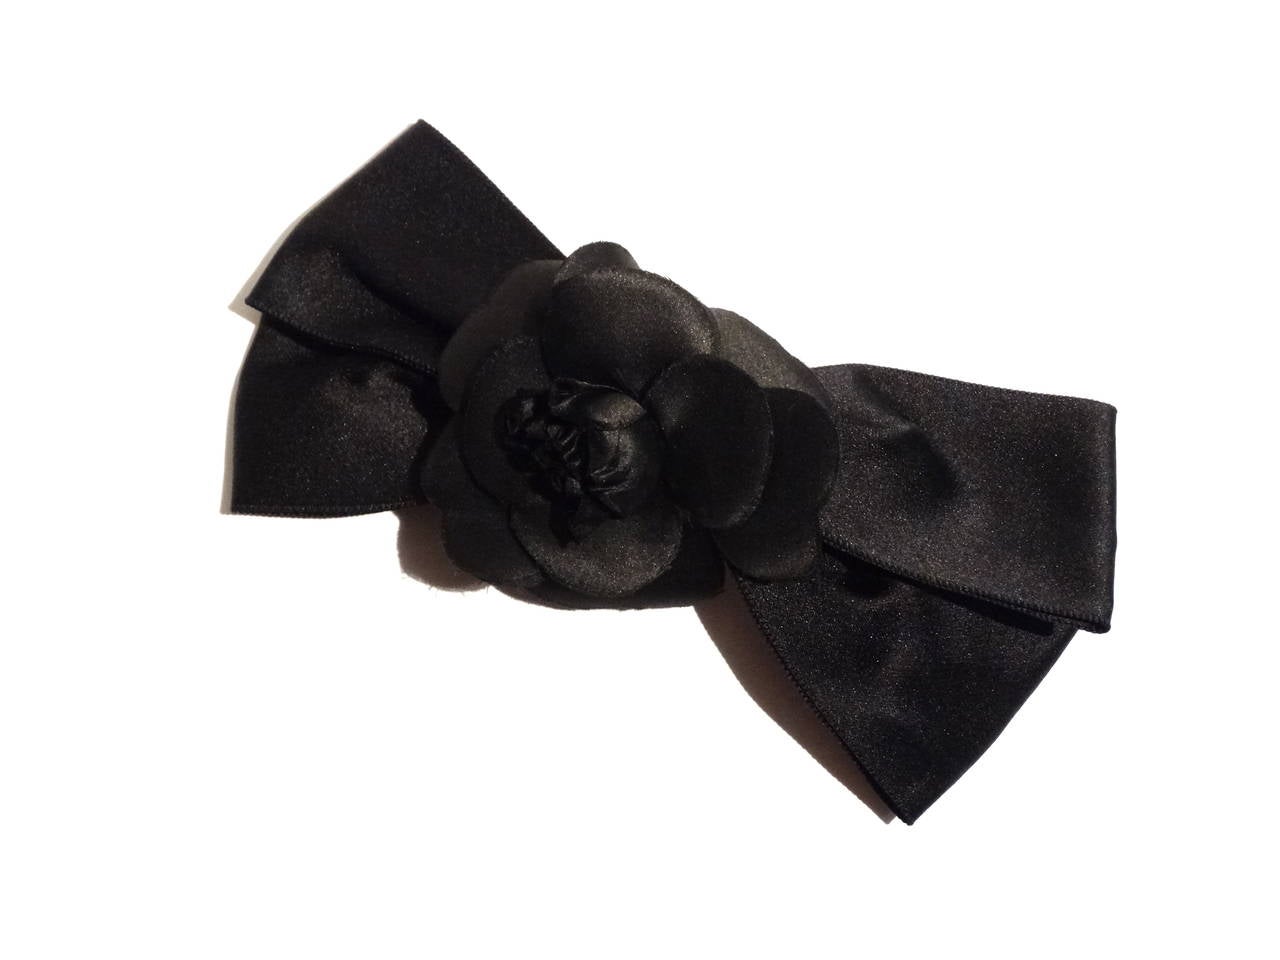 1990s Chanel Black Bow with Black Camellia Flower Hair Barrette 2